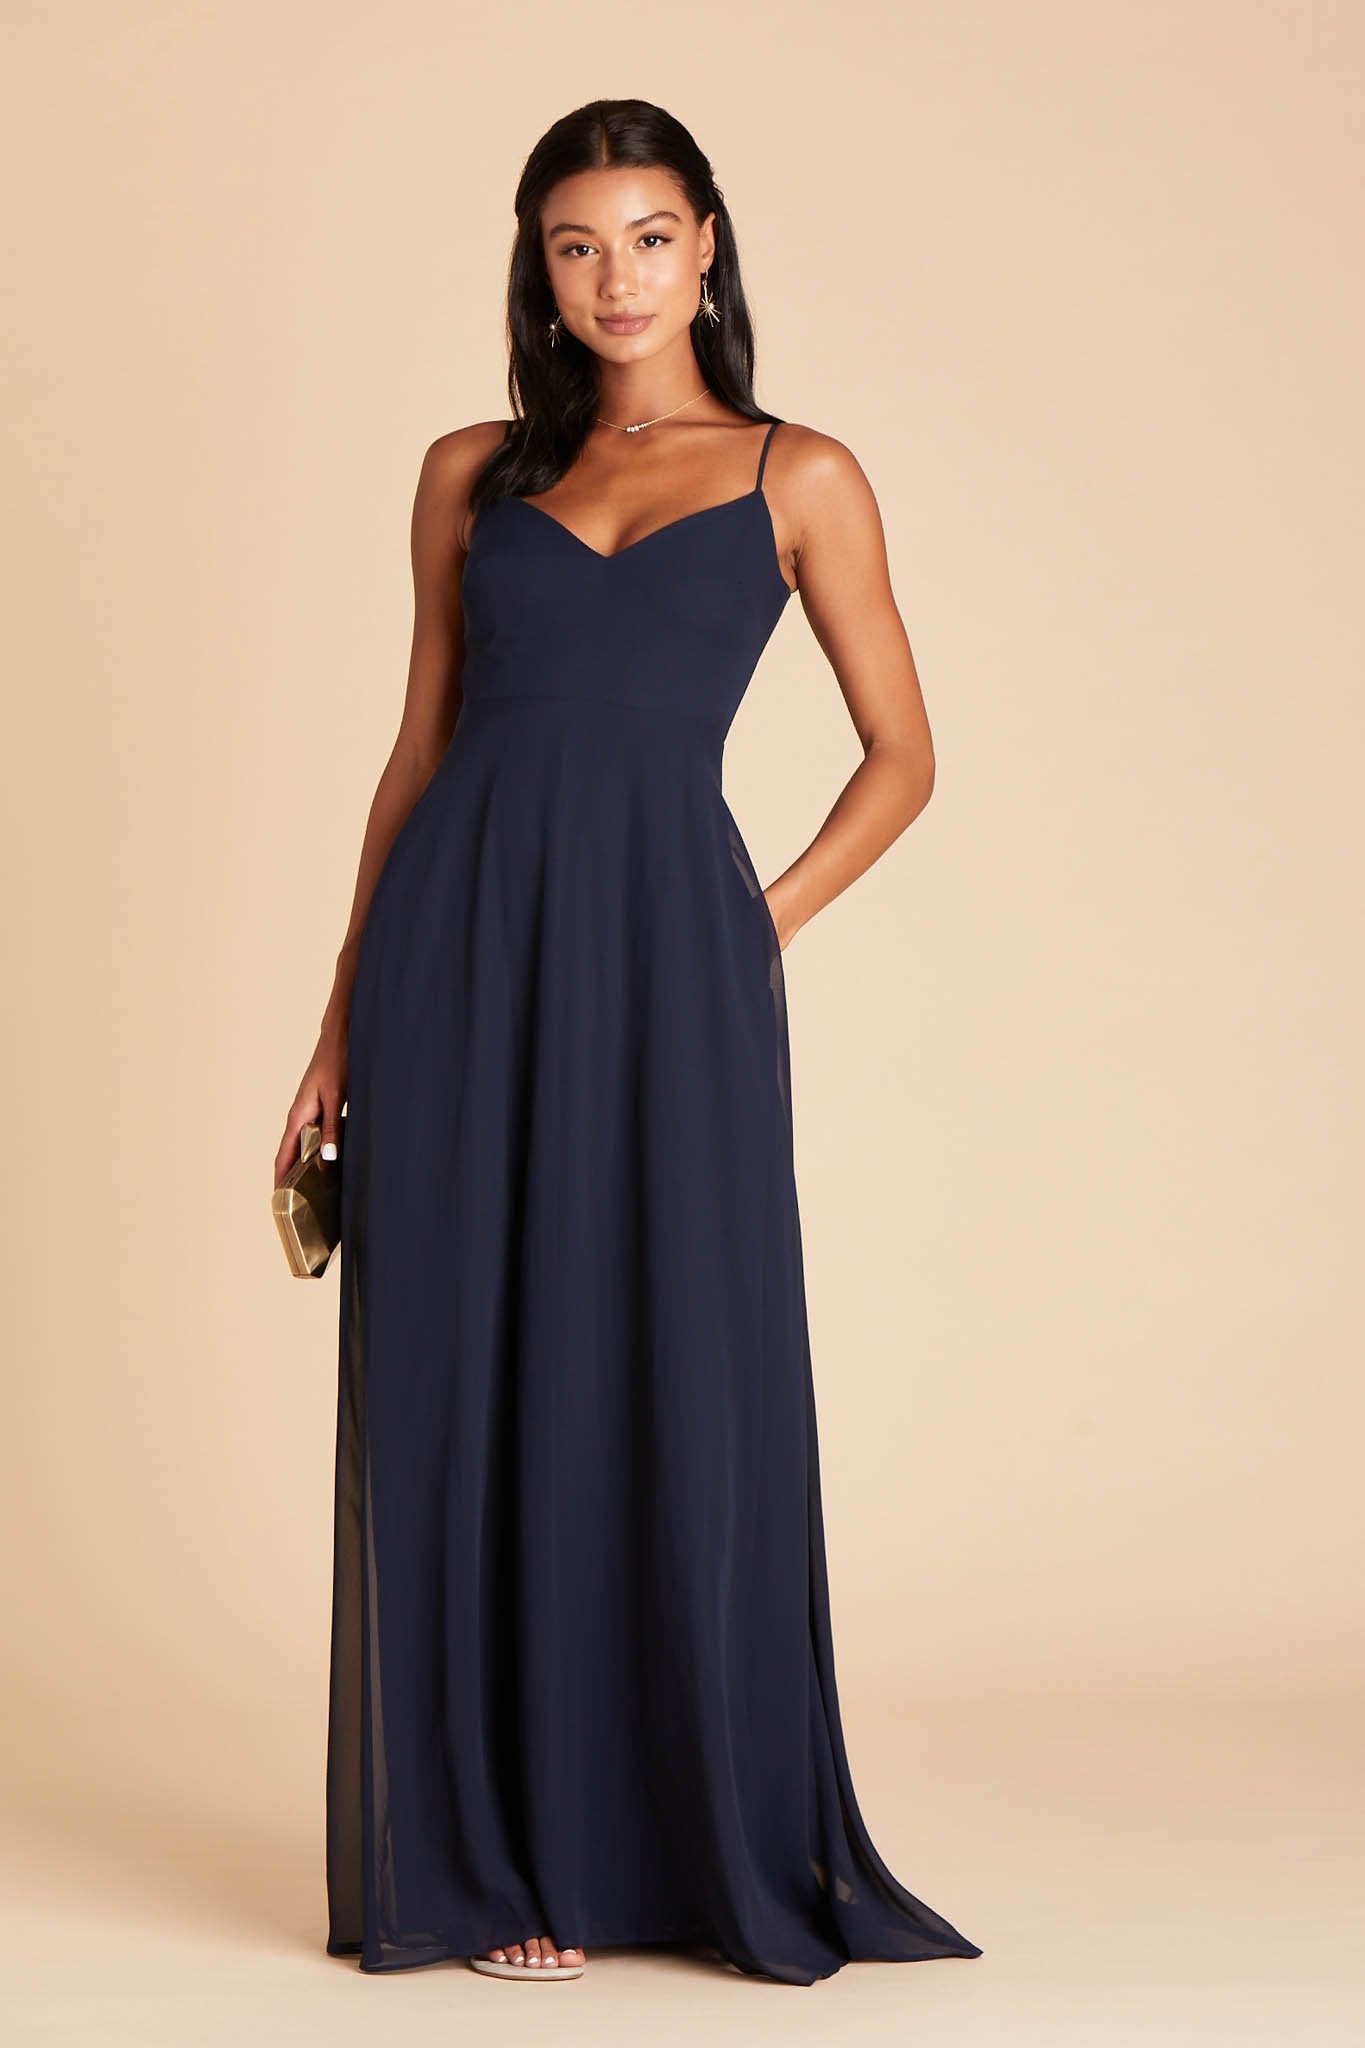 Devin convertible bridesmaid dress in navy blue chiffon by Birdy Grey, front view